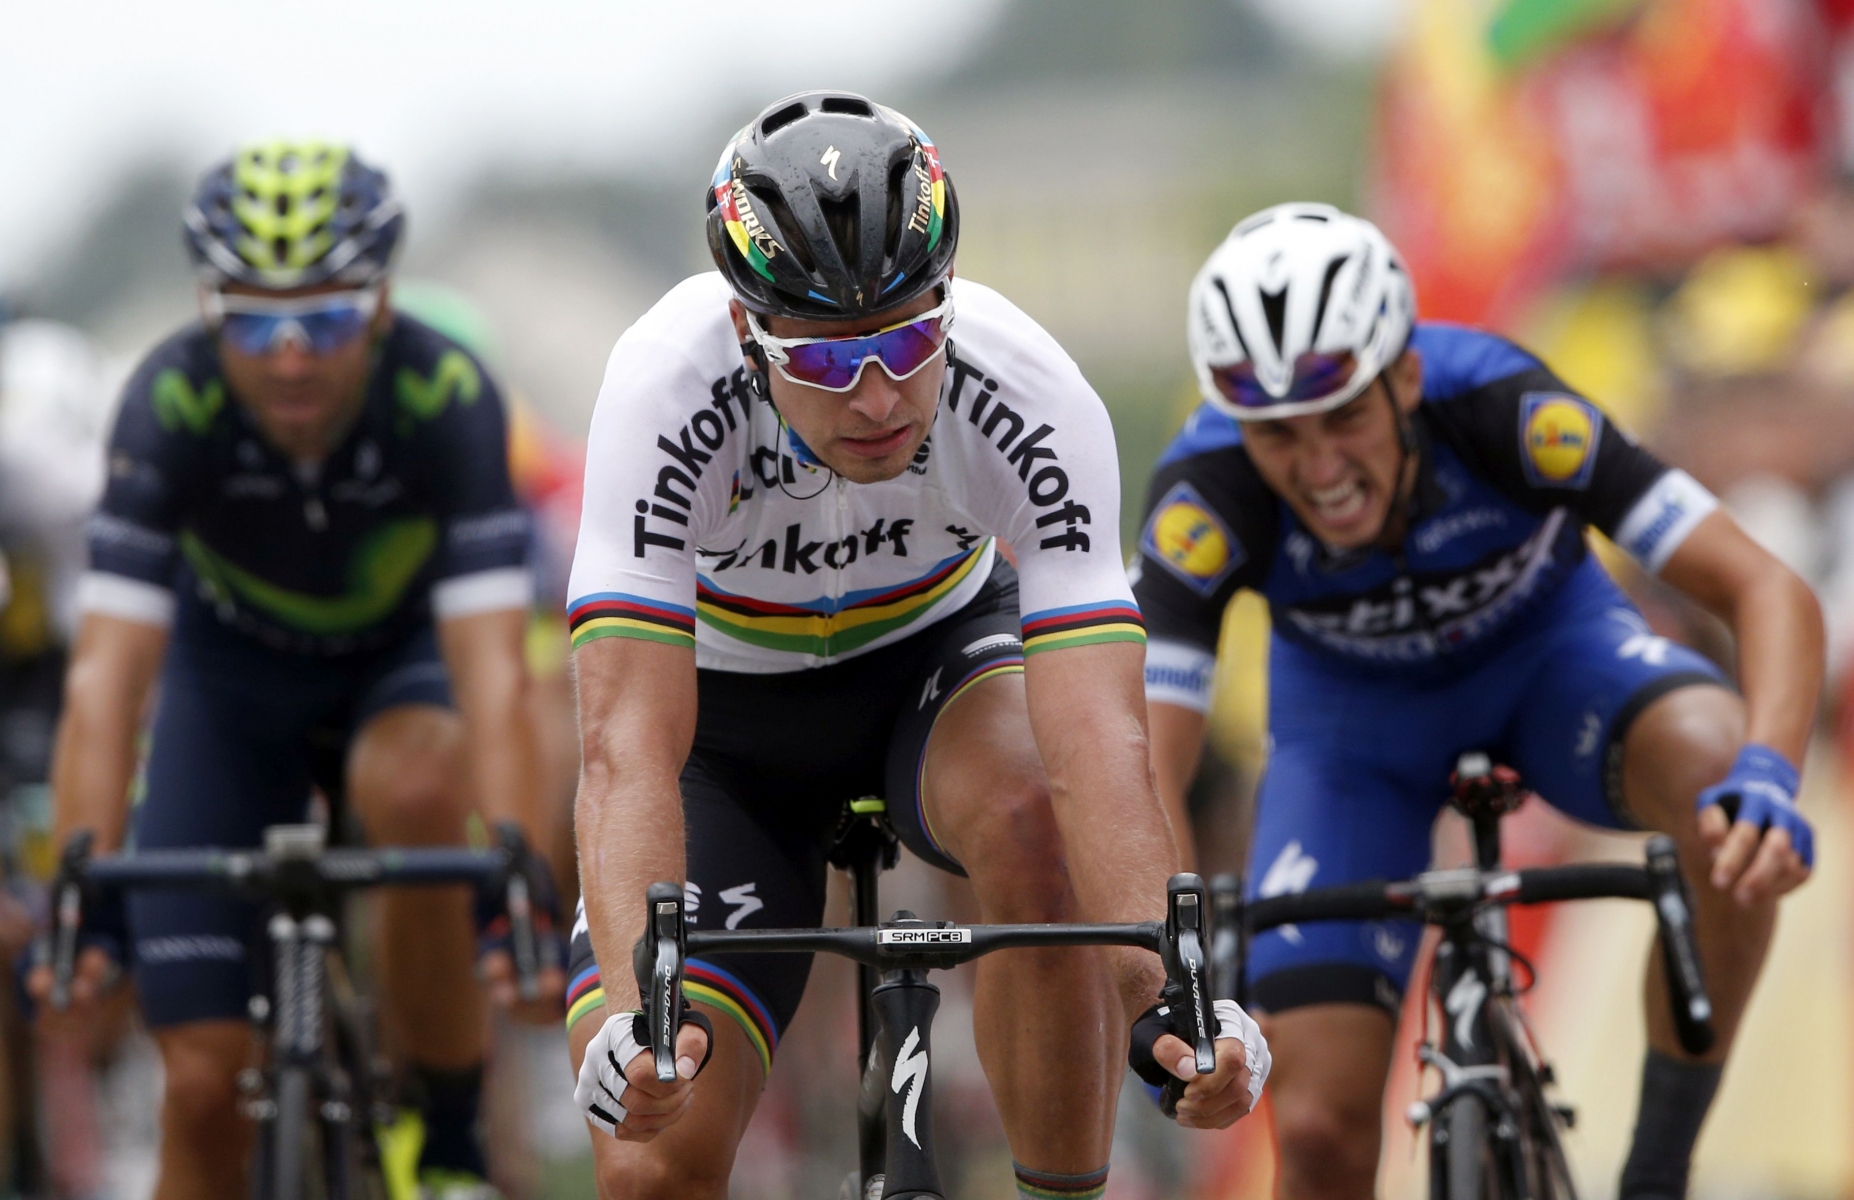 Peter Sagan of Slovakia, center, crosses the finish line to win the second stage of the Tour de France cycling race over 183 kilometers (113.7 miles) with start in Saint-Lo and finish in Cherbourg-en-Cotentin, France, Sunday, July 3, 2016. (AP Photo/Christophe Ena)